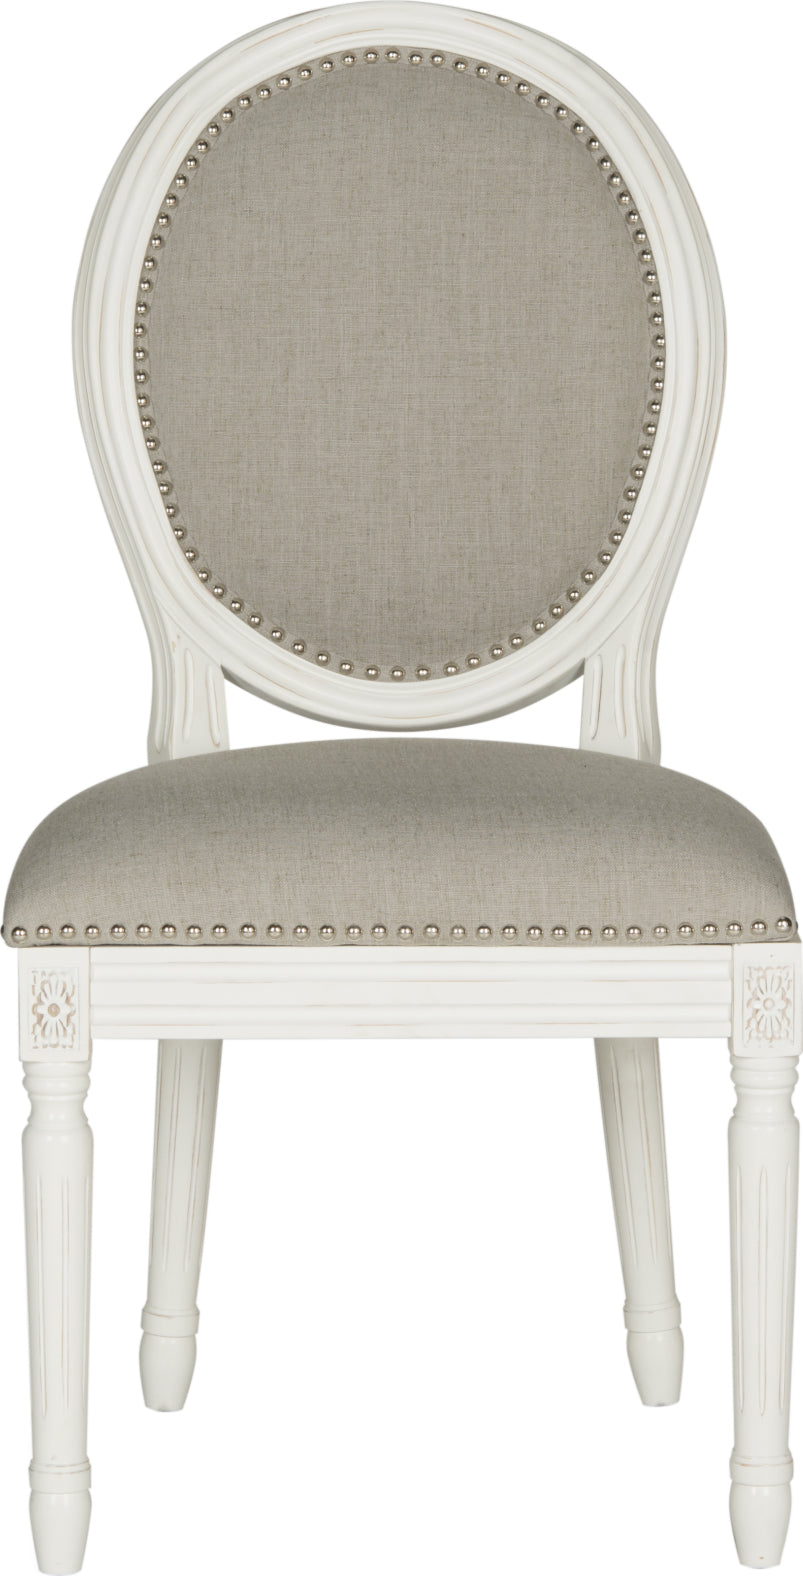 Safavieh Holloway 19''H French Brasserie Linen Oval Side Chair-Silver Nail Heads Light Grey and Cream Furniture main image